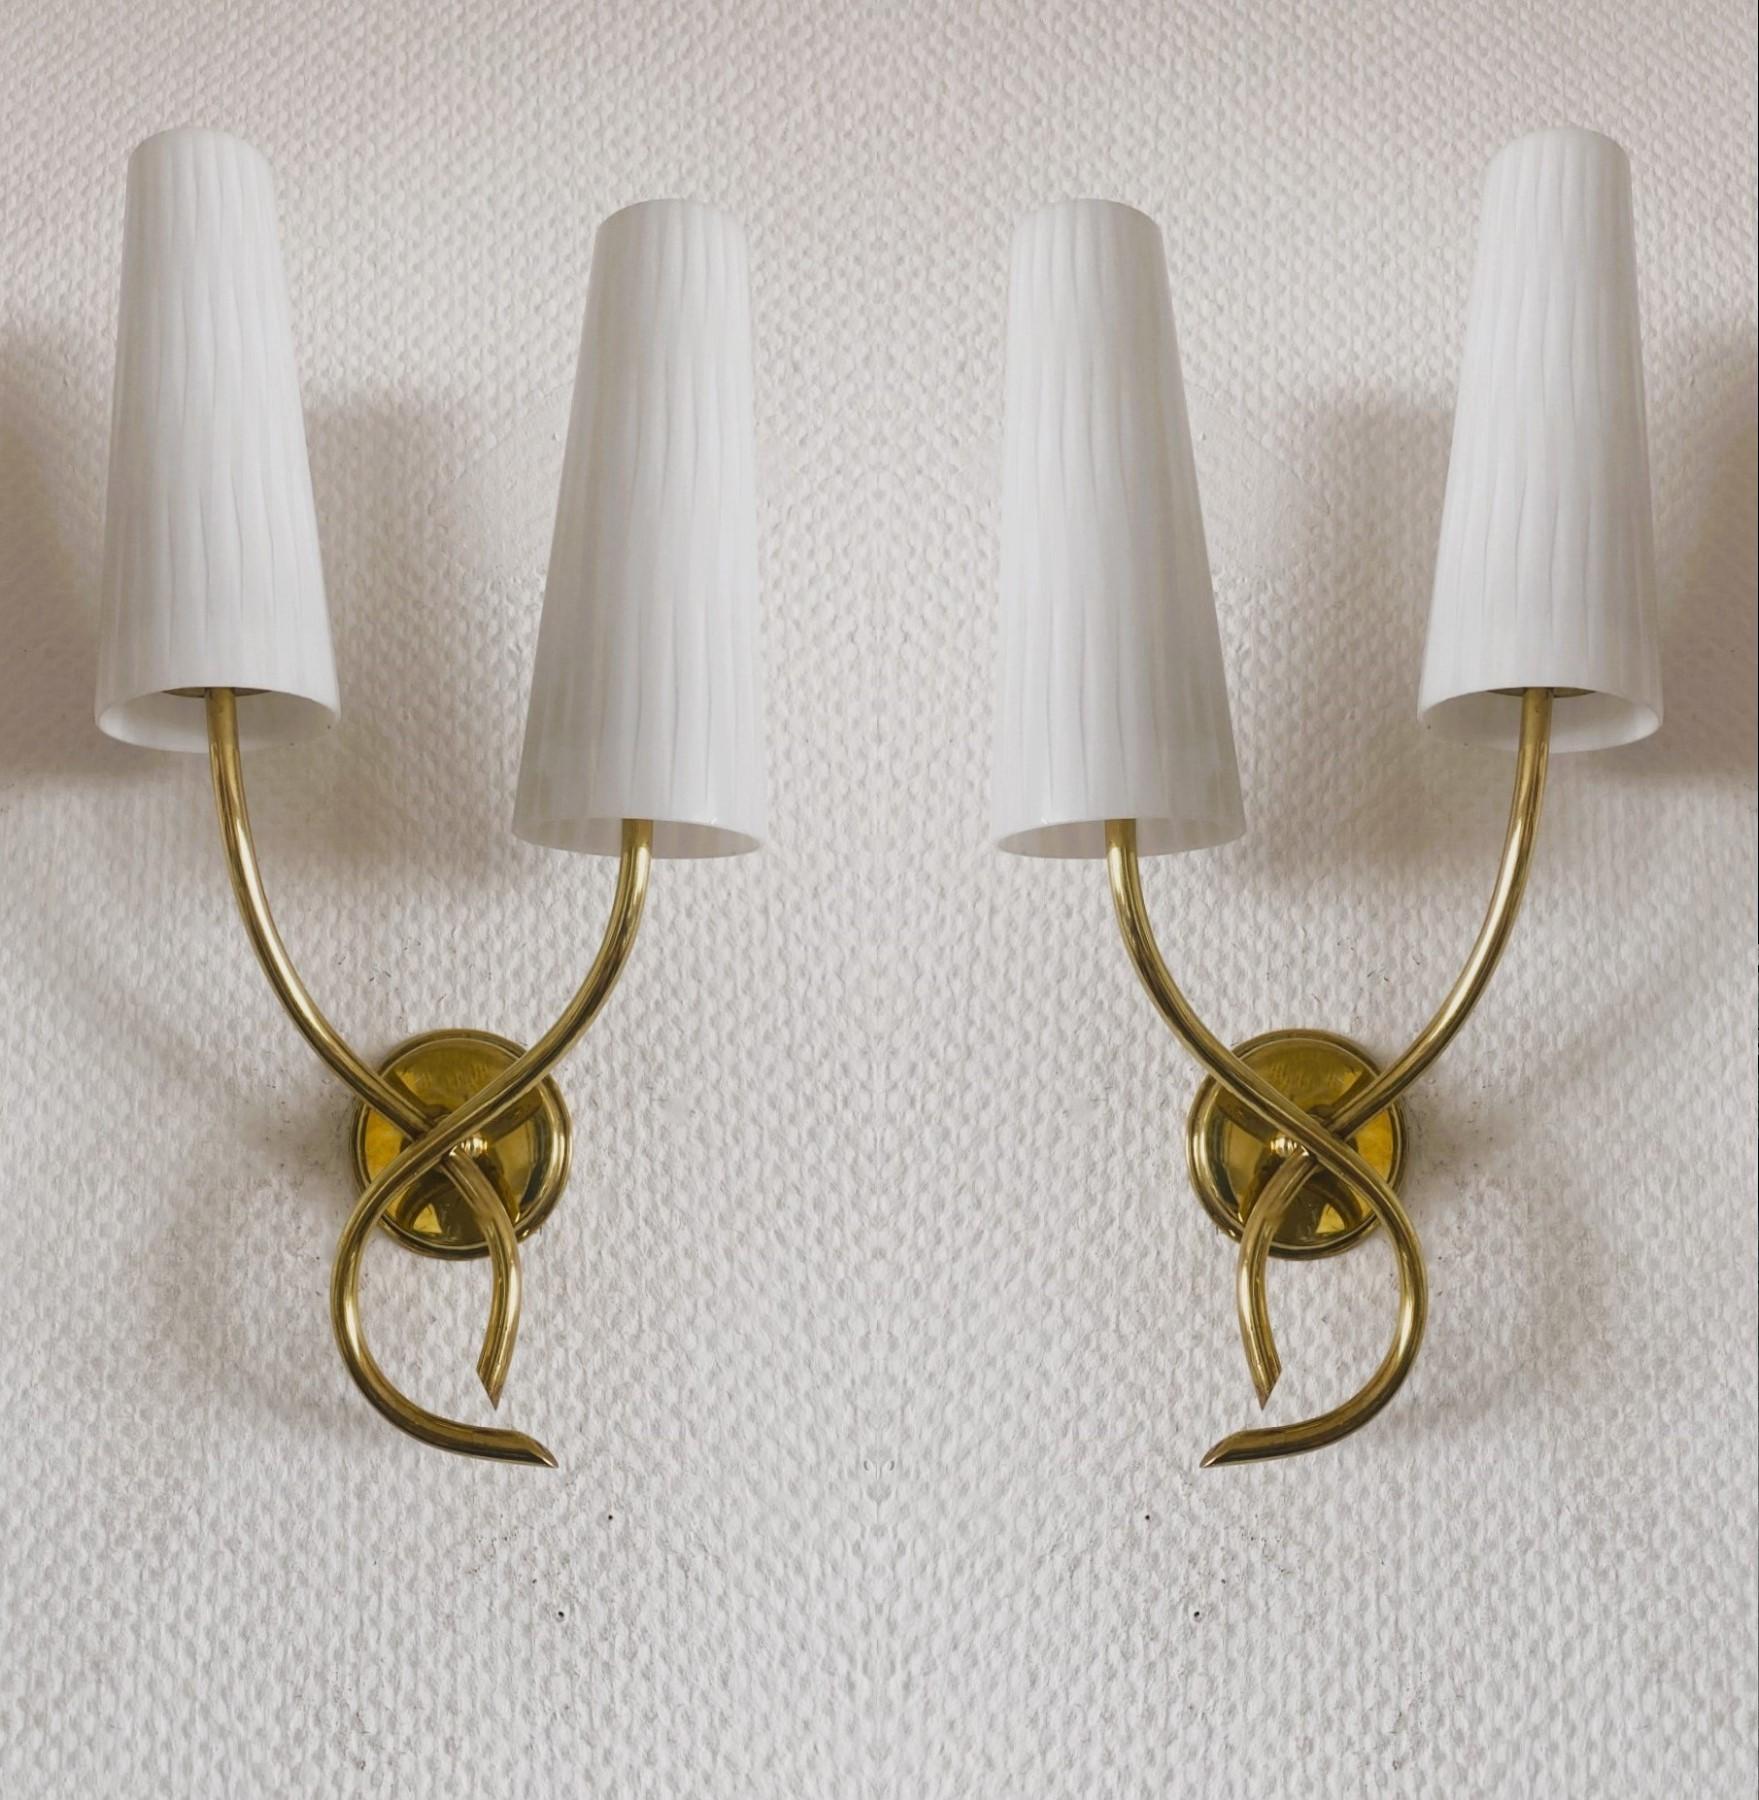 A lovely pair of Maison Lunel wall lights France, 1950s. Elegant design in gilt brass with two crossing scrolled Lamp-arm  with opaline glass shades. Both pieces in fine vintage condition, beautiful aged patina  to brass, without damages, glass